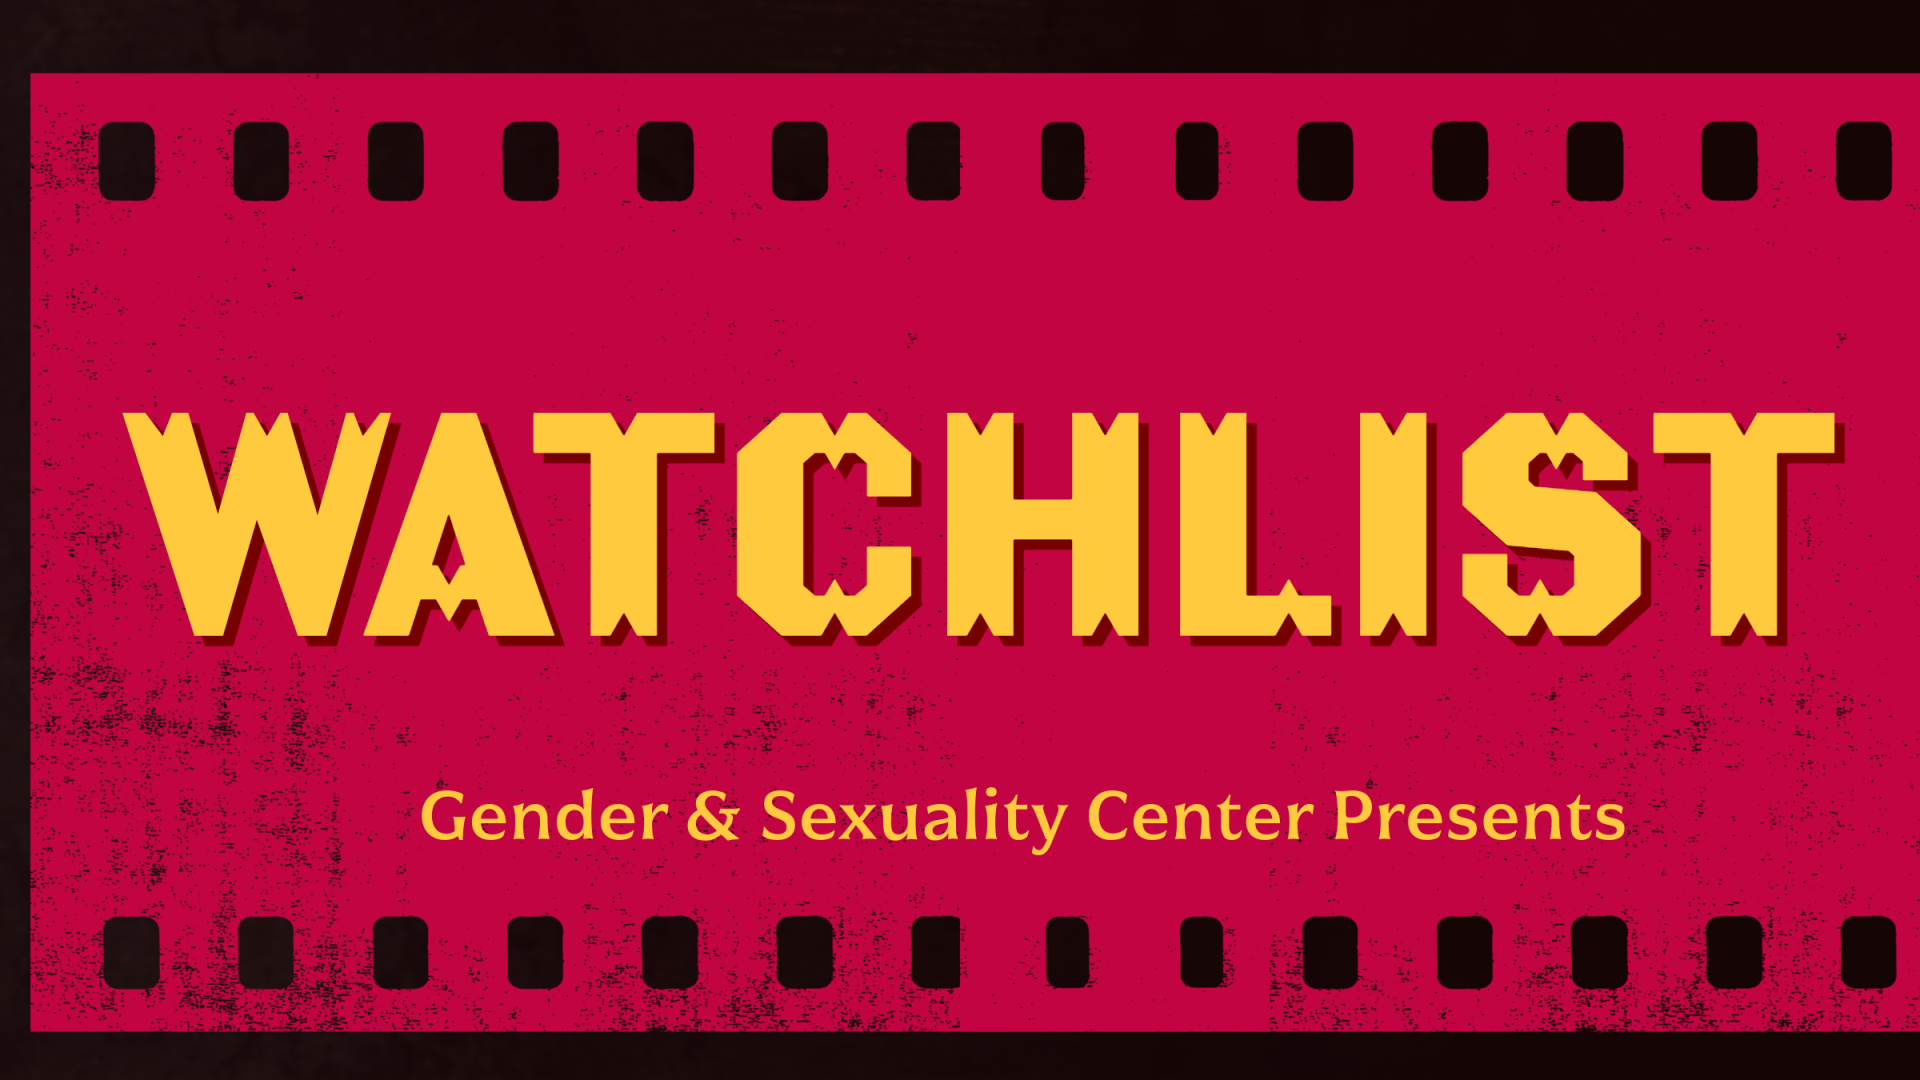 A red movie reel lines a background with a yellow title above it. Gender &amp;amp;Sexuality Center Presents Watchlist